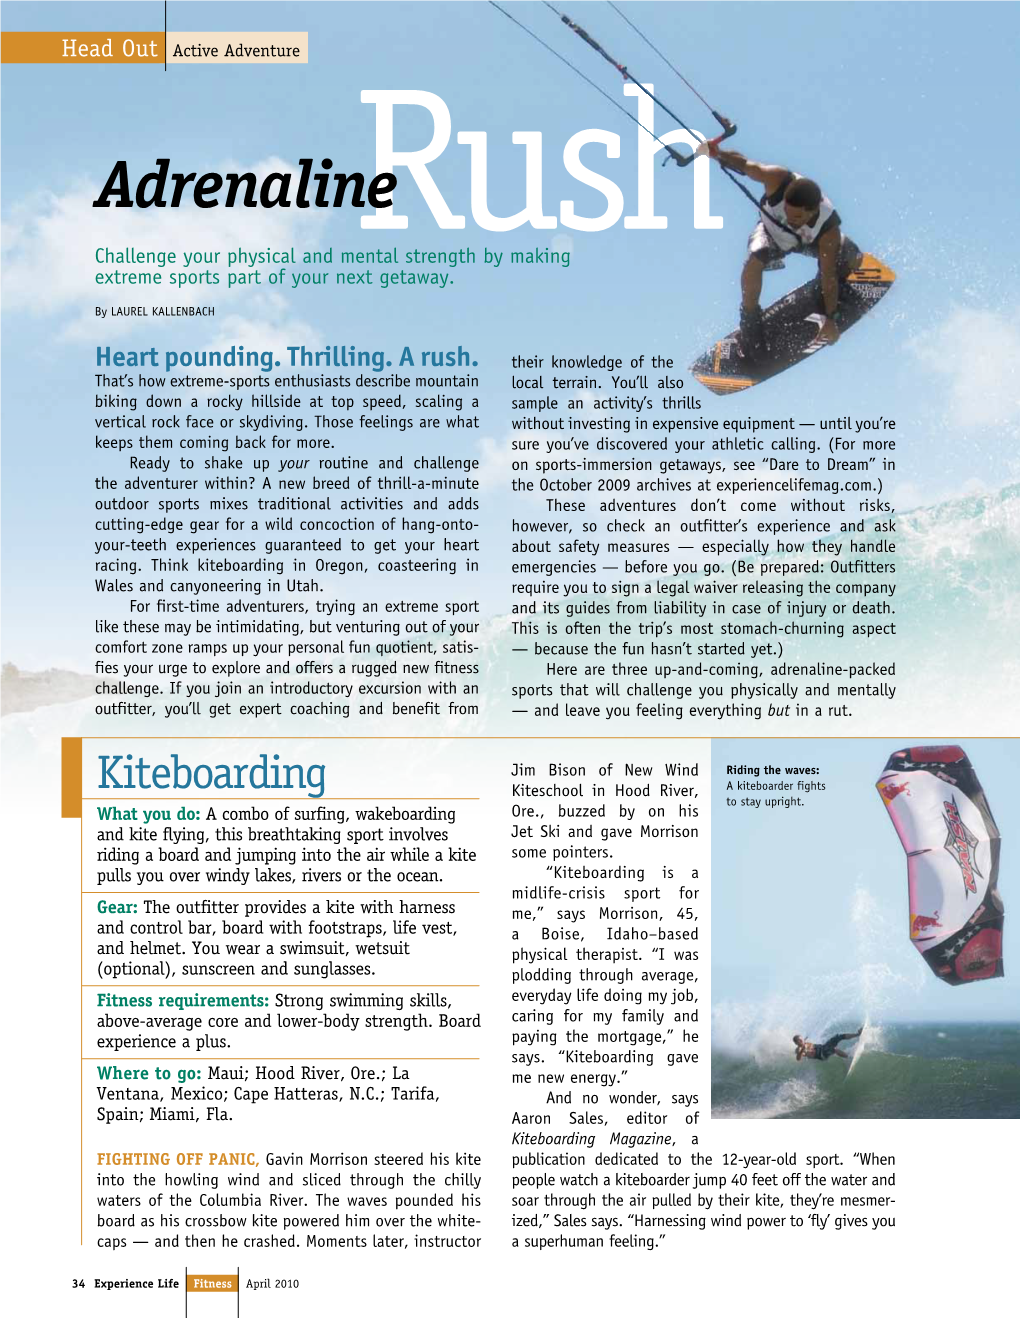 Adrenaline Challenge Your Physical and Mentalrush Strength by Making Extreme Sports Part of Your Next Getaway